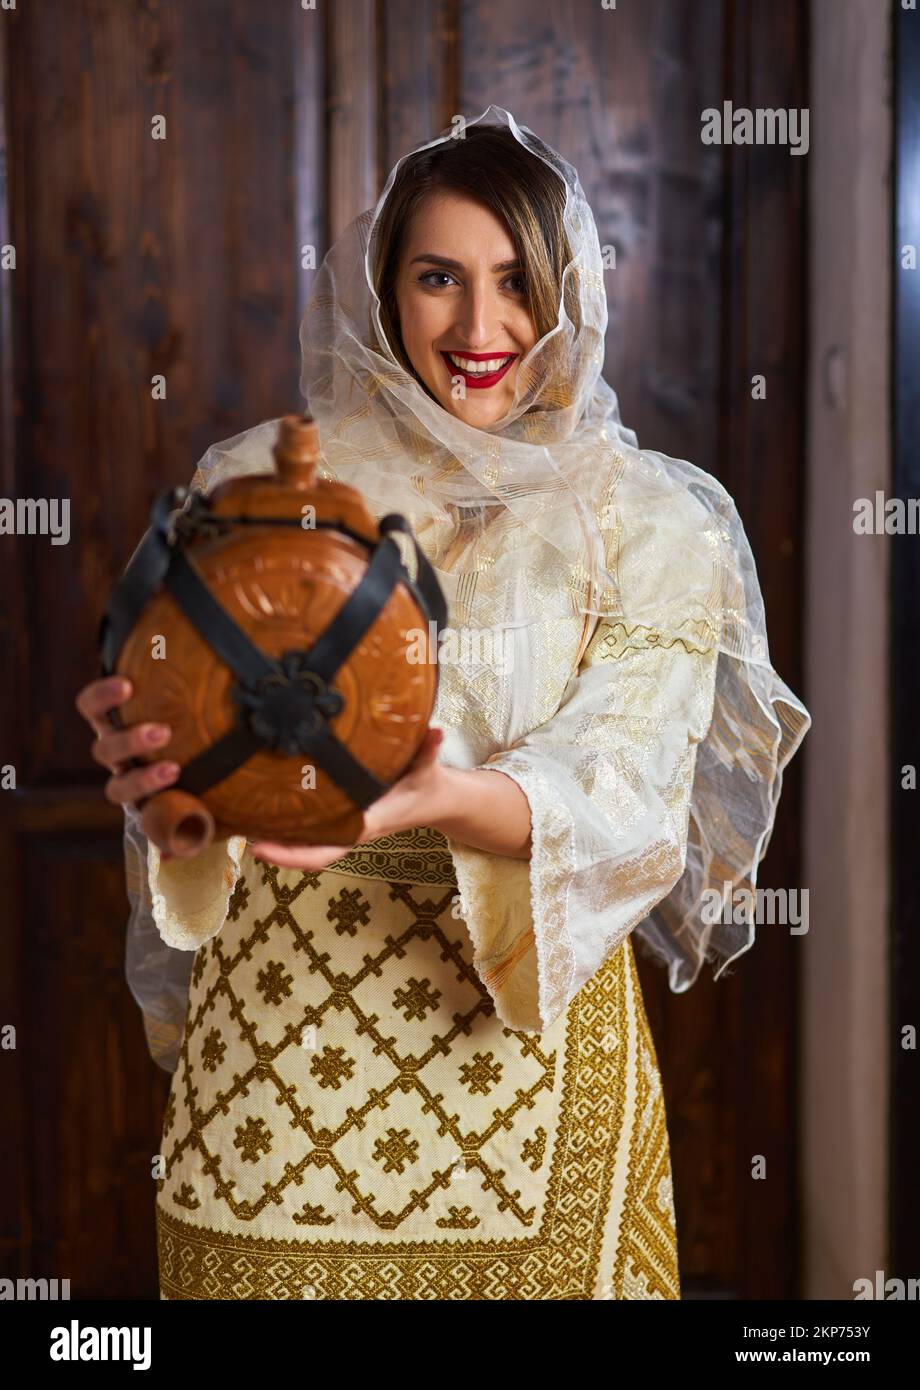 Young Romanian woman in traditional bride popular costume in a vintage home holding a wooden wine bottle Stock Photo